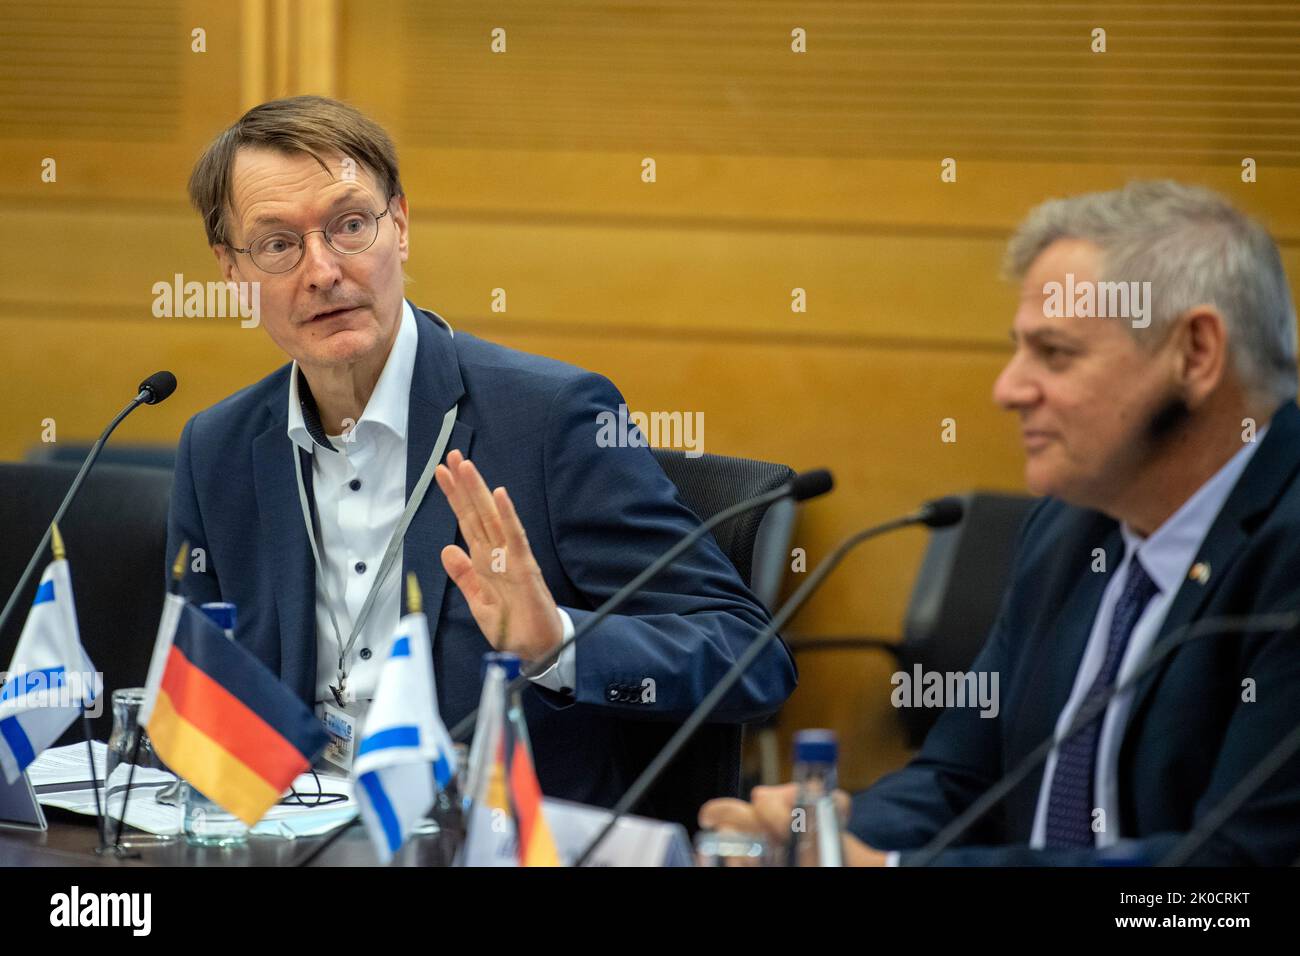 Jerusalem, Israel. 11th Sep, 2022. Karl Lauterbach (SPD, l), German Minister of Health, speaks at a meeting with Nitzan Horowitz (r), Chairman of the Meretz party and Israeli Minister of Health, in the Knesset's 'Jerusalem Hall'. For the German minister, the focus in Israel is on German-Israeli friendship, joint pandemic control and Israel as a role model for the digitization of the healthcare system. Credit: Christophe Gateau/dpa/Alamy Live News Stock Photo